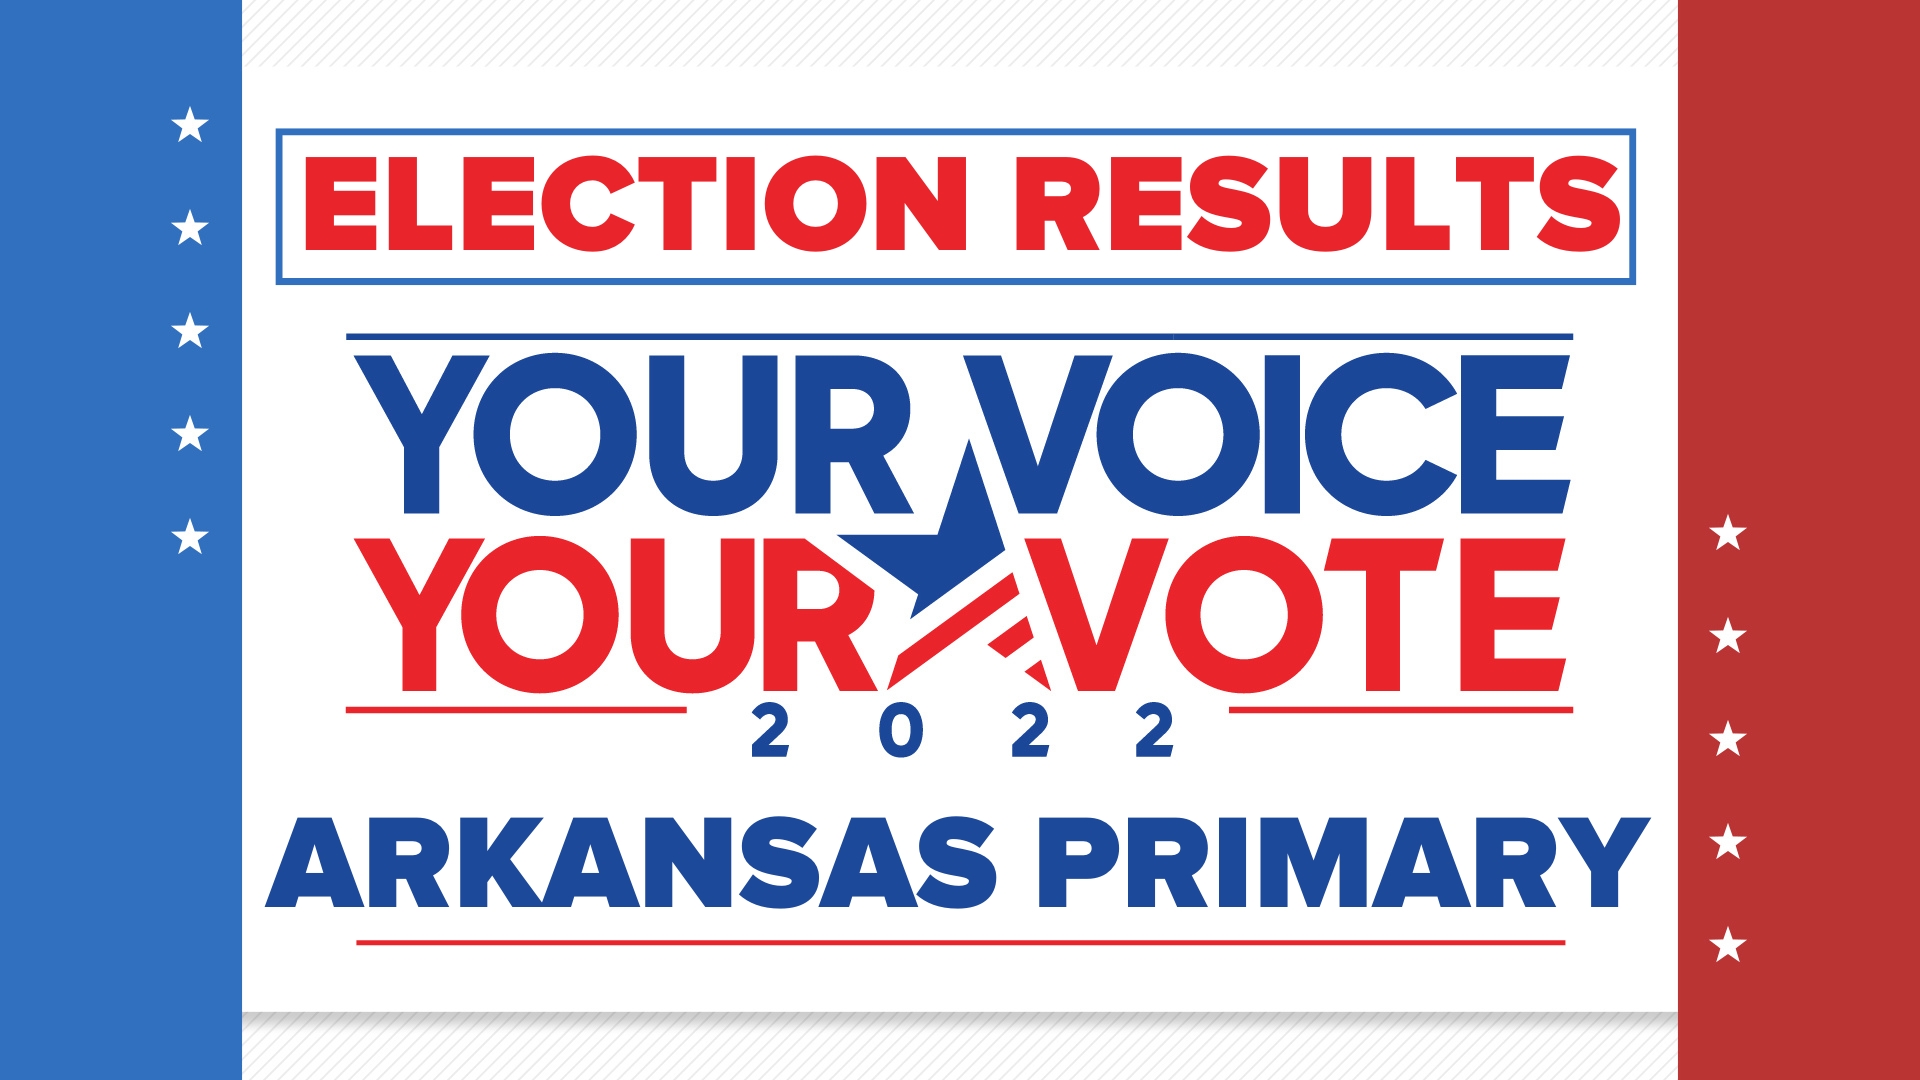 Arkansas Primary Election Results